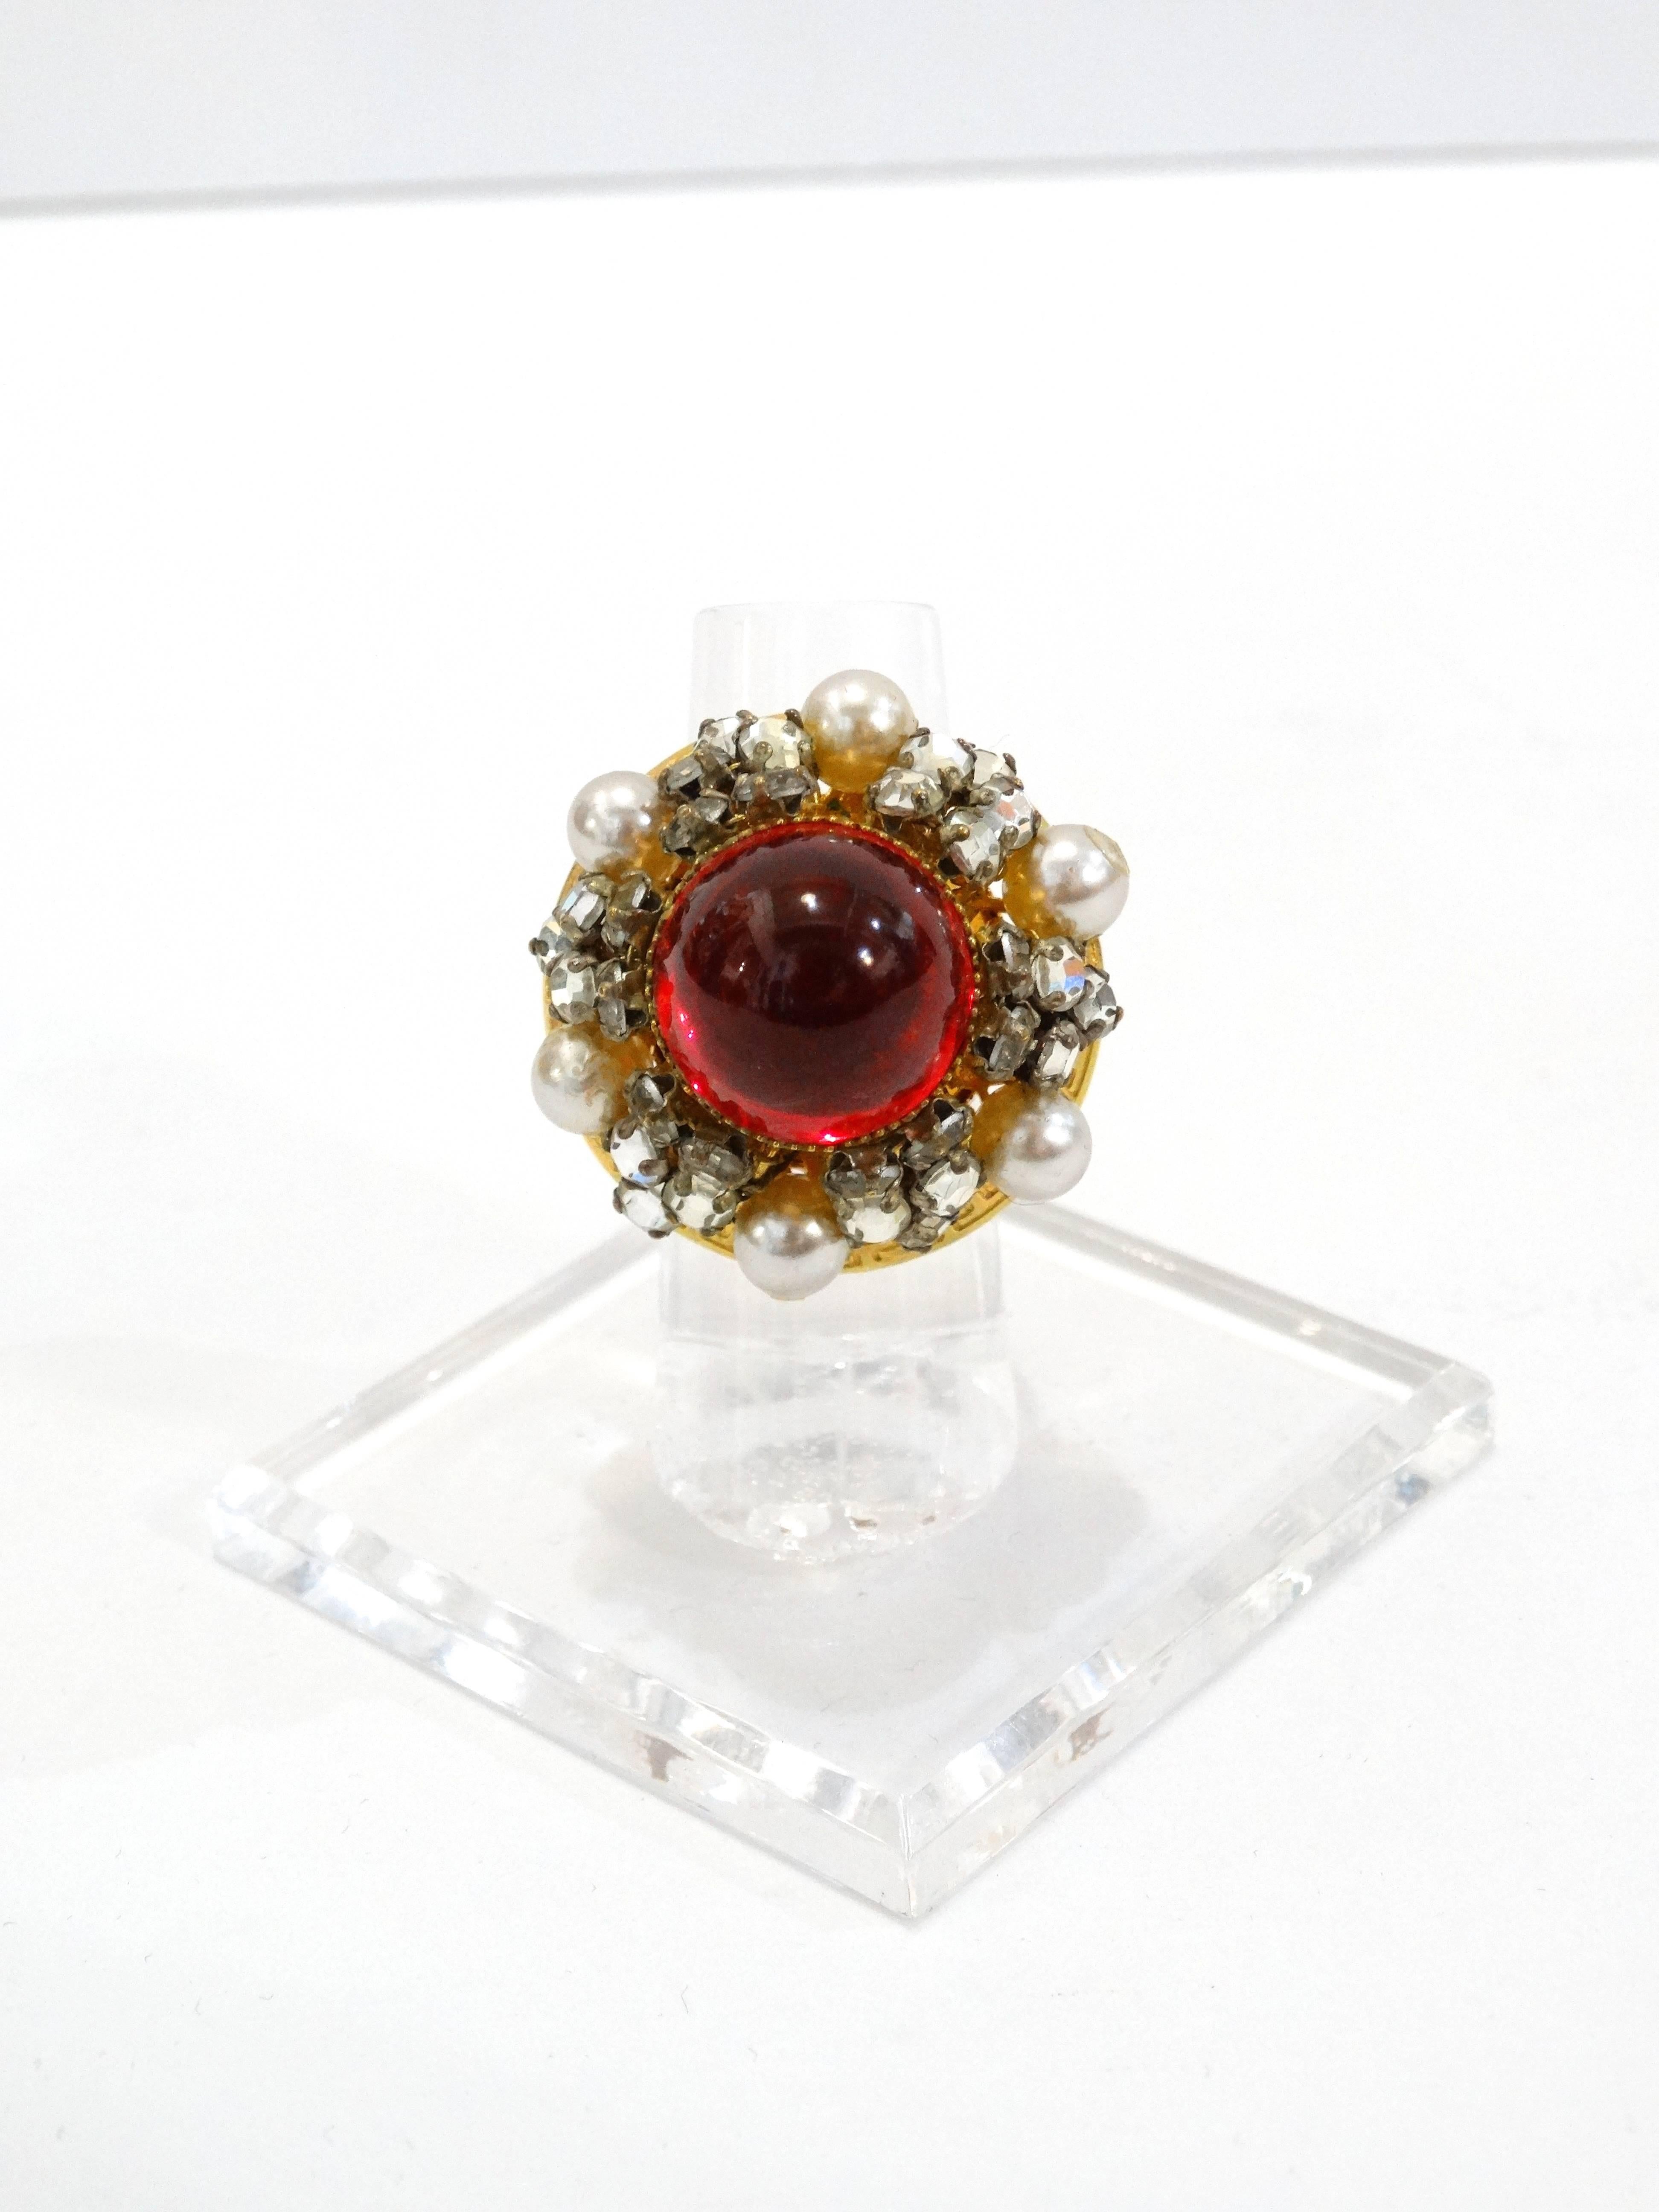 Incredible cocktail ring 1970s designed by William De Lillo! Rich gold metal with Greek key design, red glass center stone. Crystal and faux pearl details. Signed by De Lillo. One size for all 